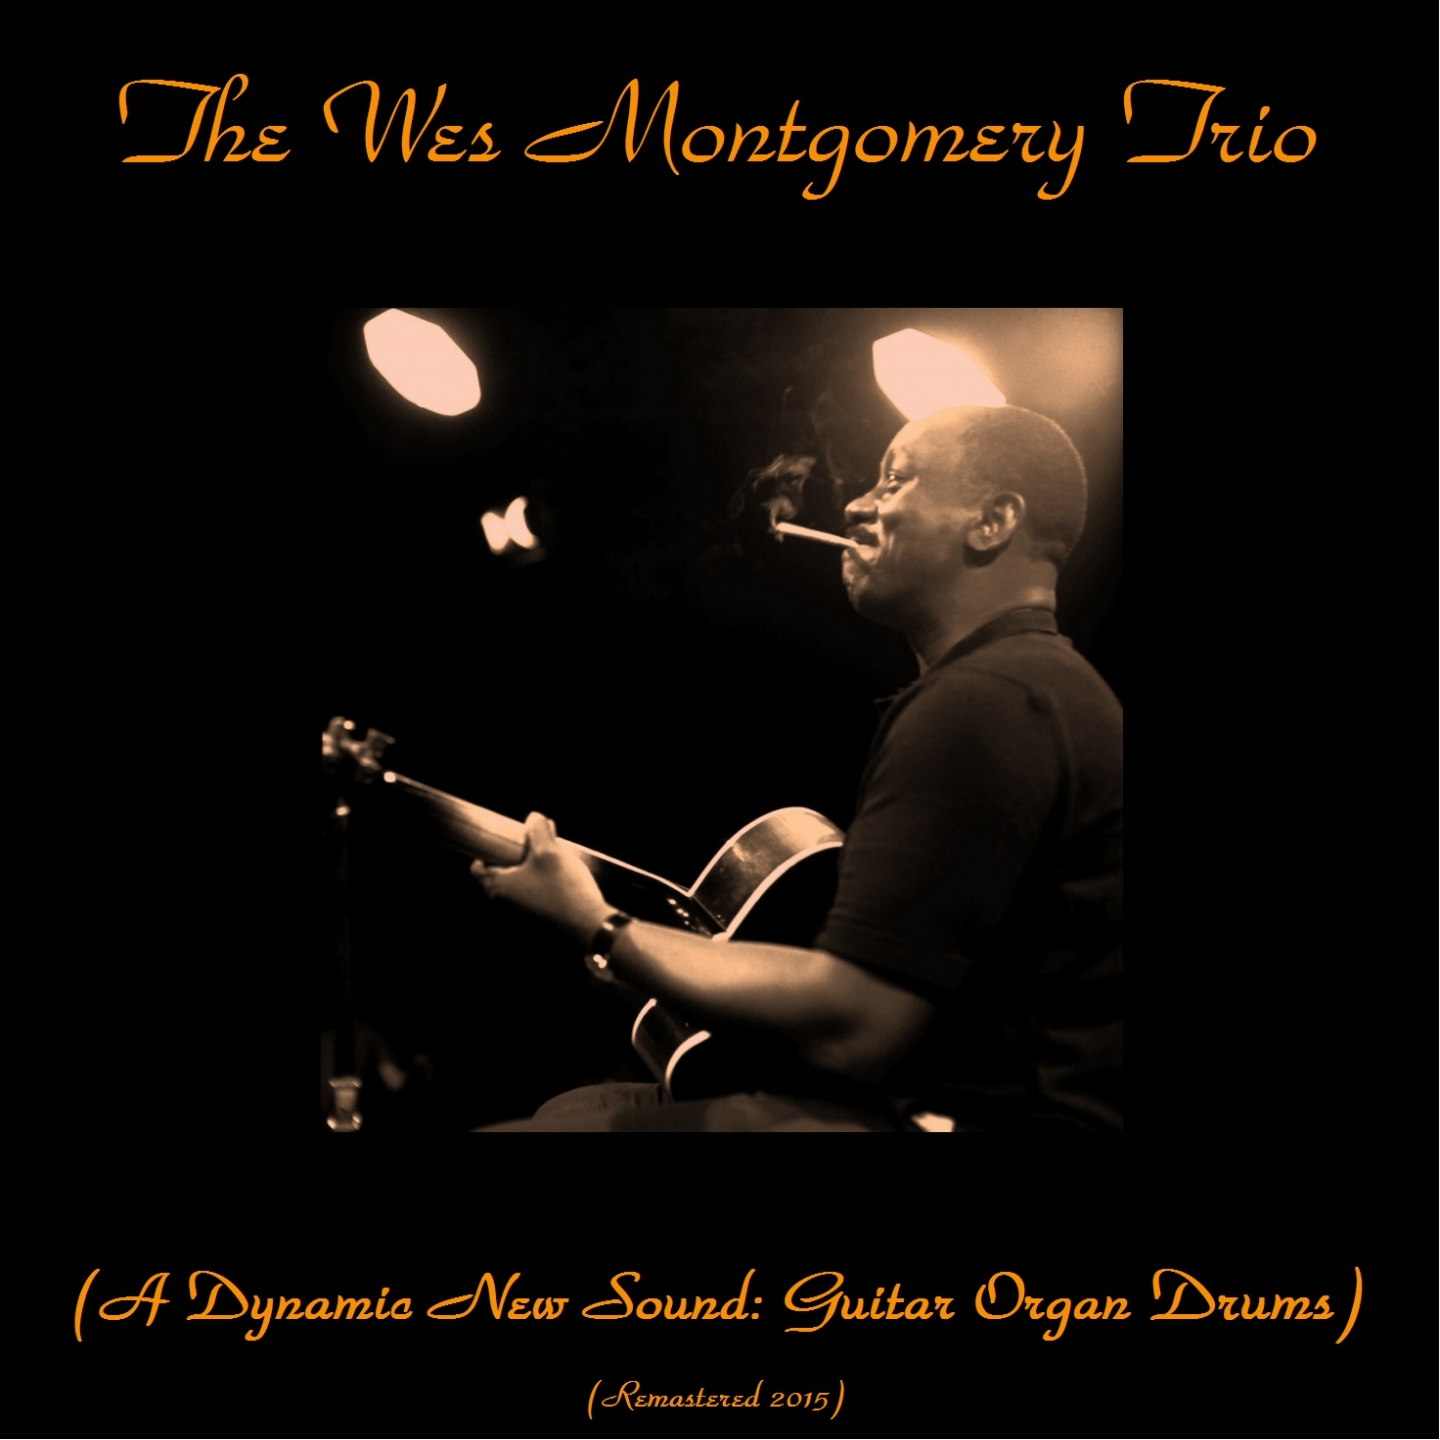 The Wes Montgomery Trio (A Dynamic New Sound: Guitar Organ Drums)